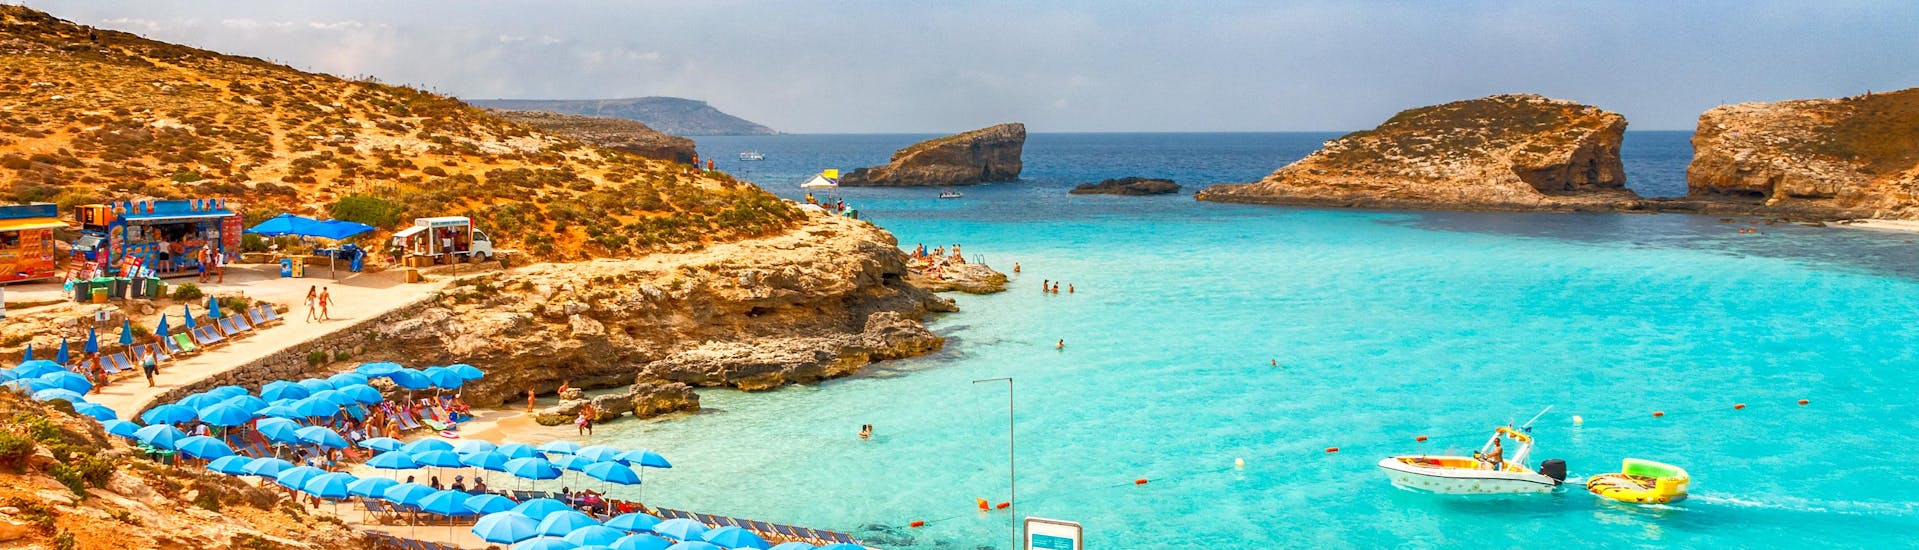 A beach in Malta where providers offer their water sports activities during the summer season. 